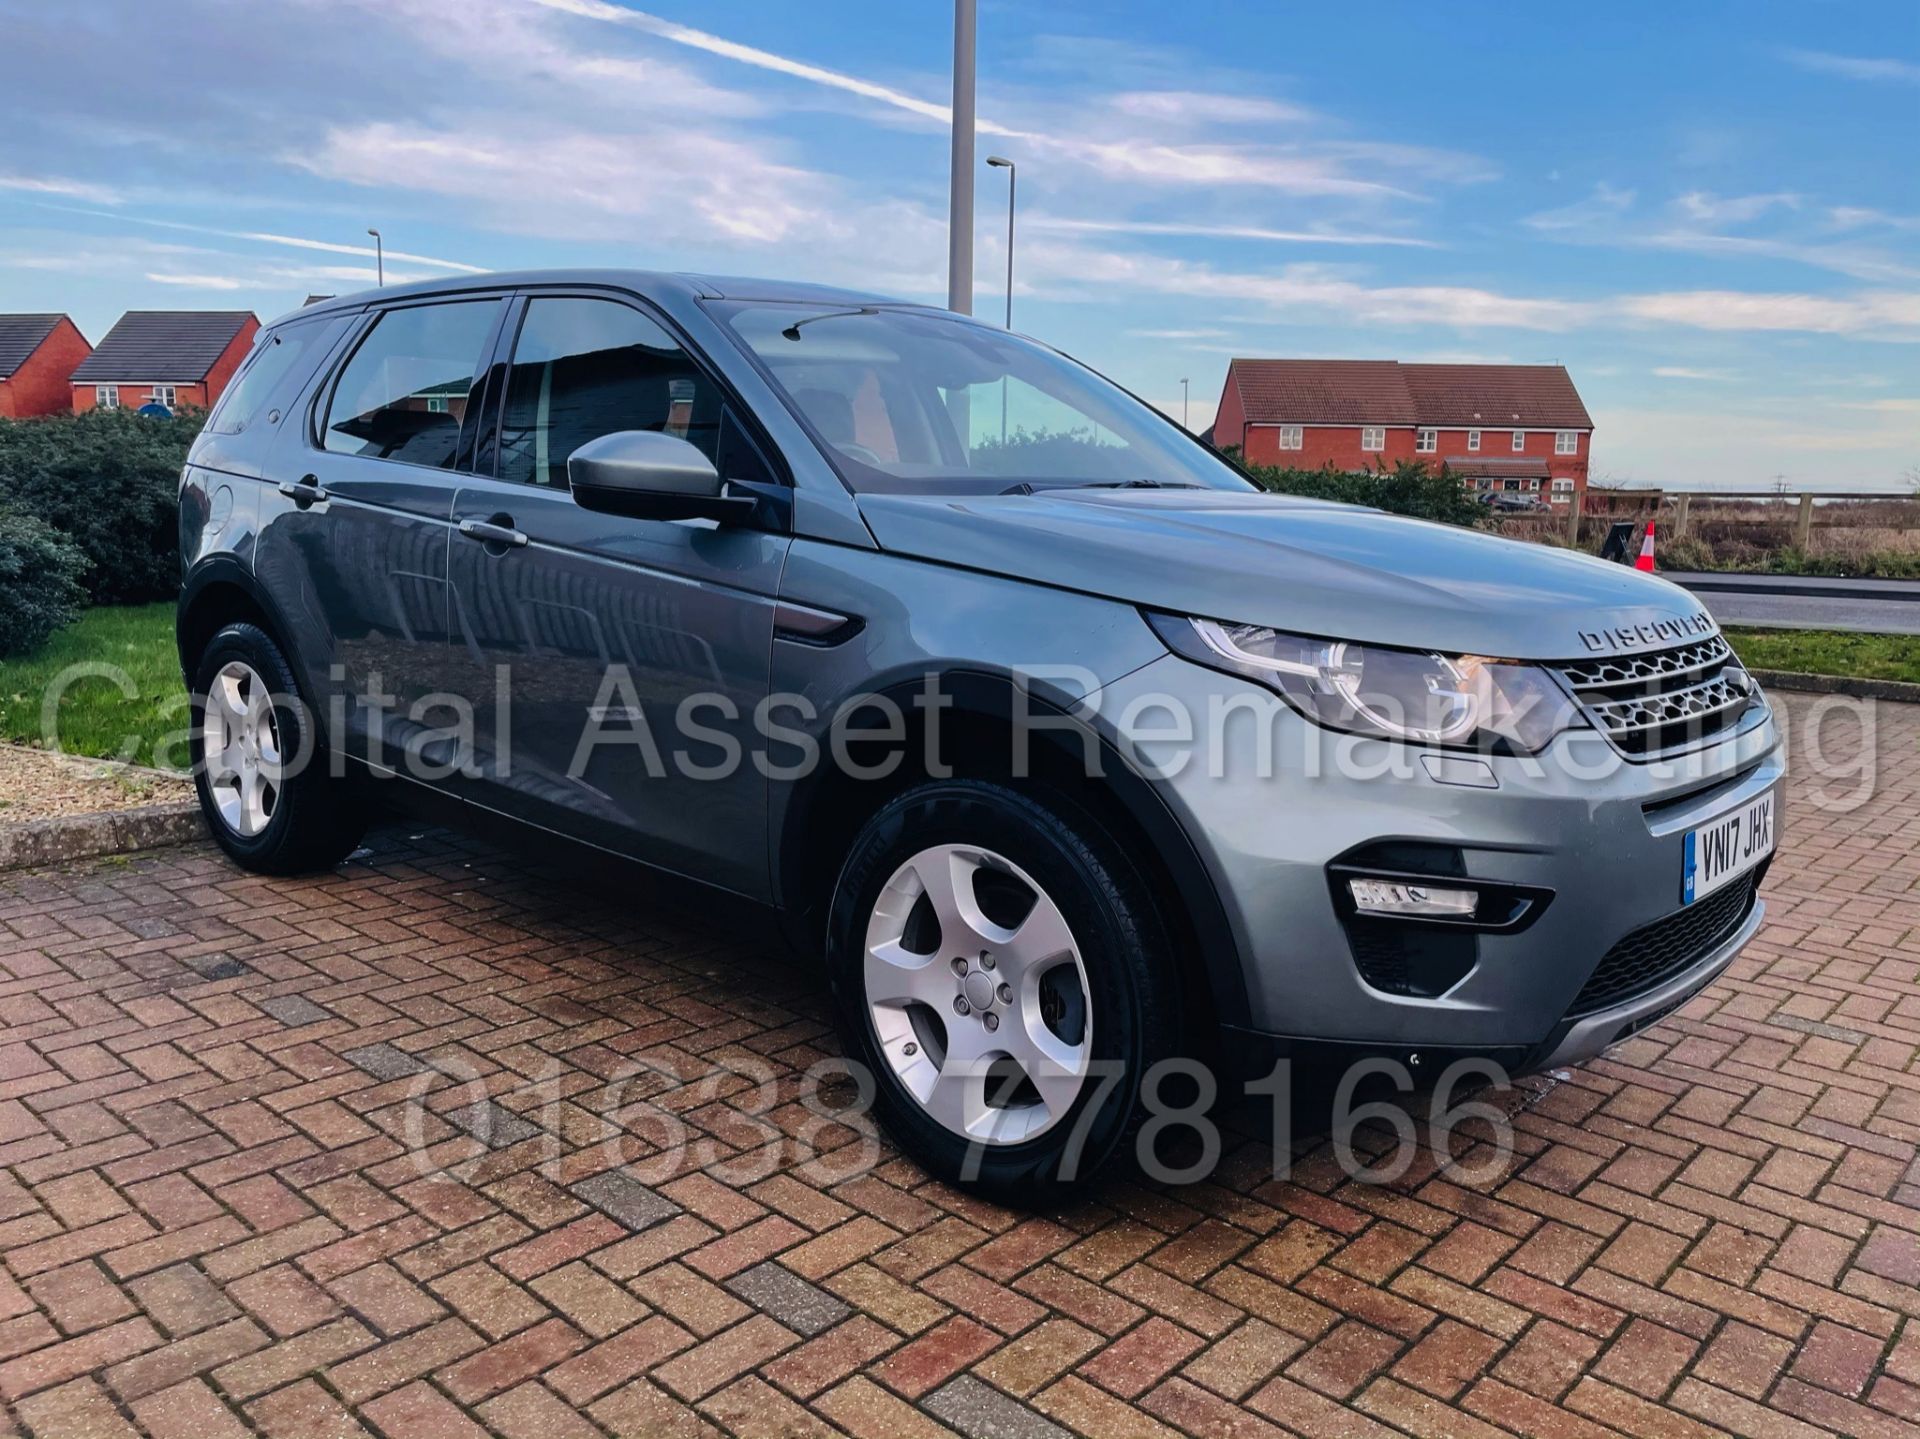 (On Sale) LAND ROVER DISCOVERY SPORT *SE TECH* SUV (2017) '2.0 TD4 - STOP/START' (1 OWNER FROM NEW) - Image 2 of 50